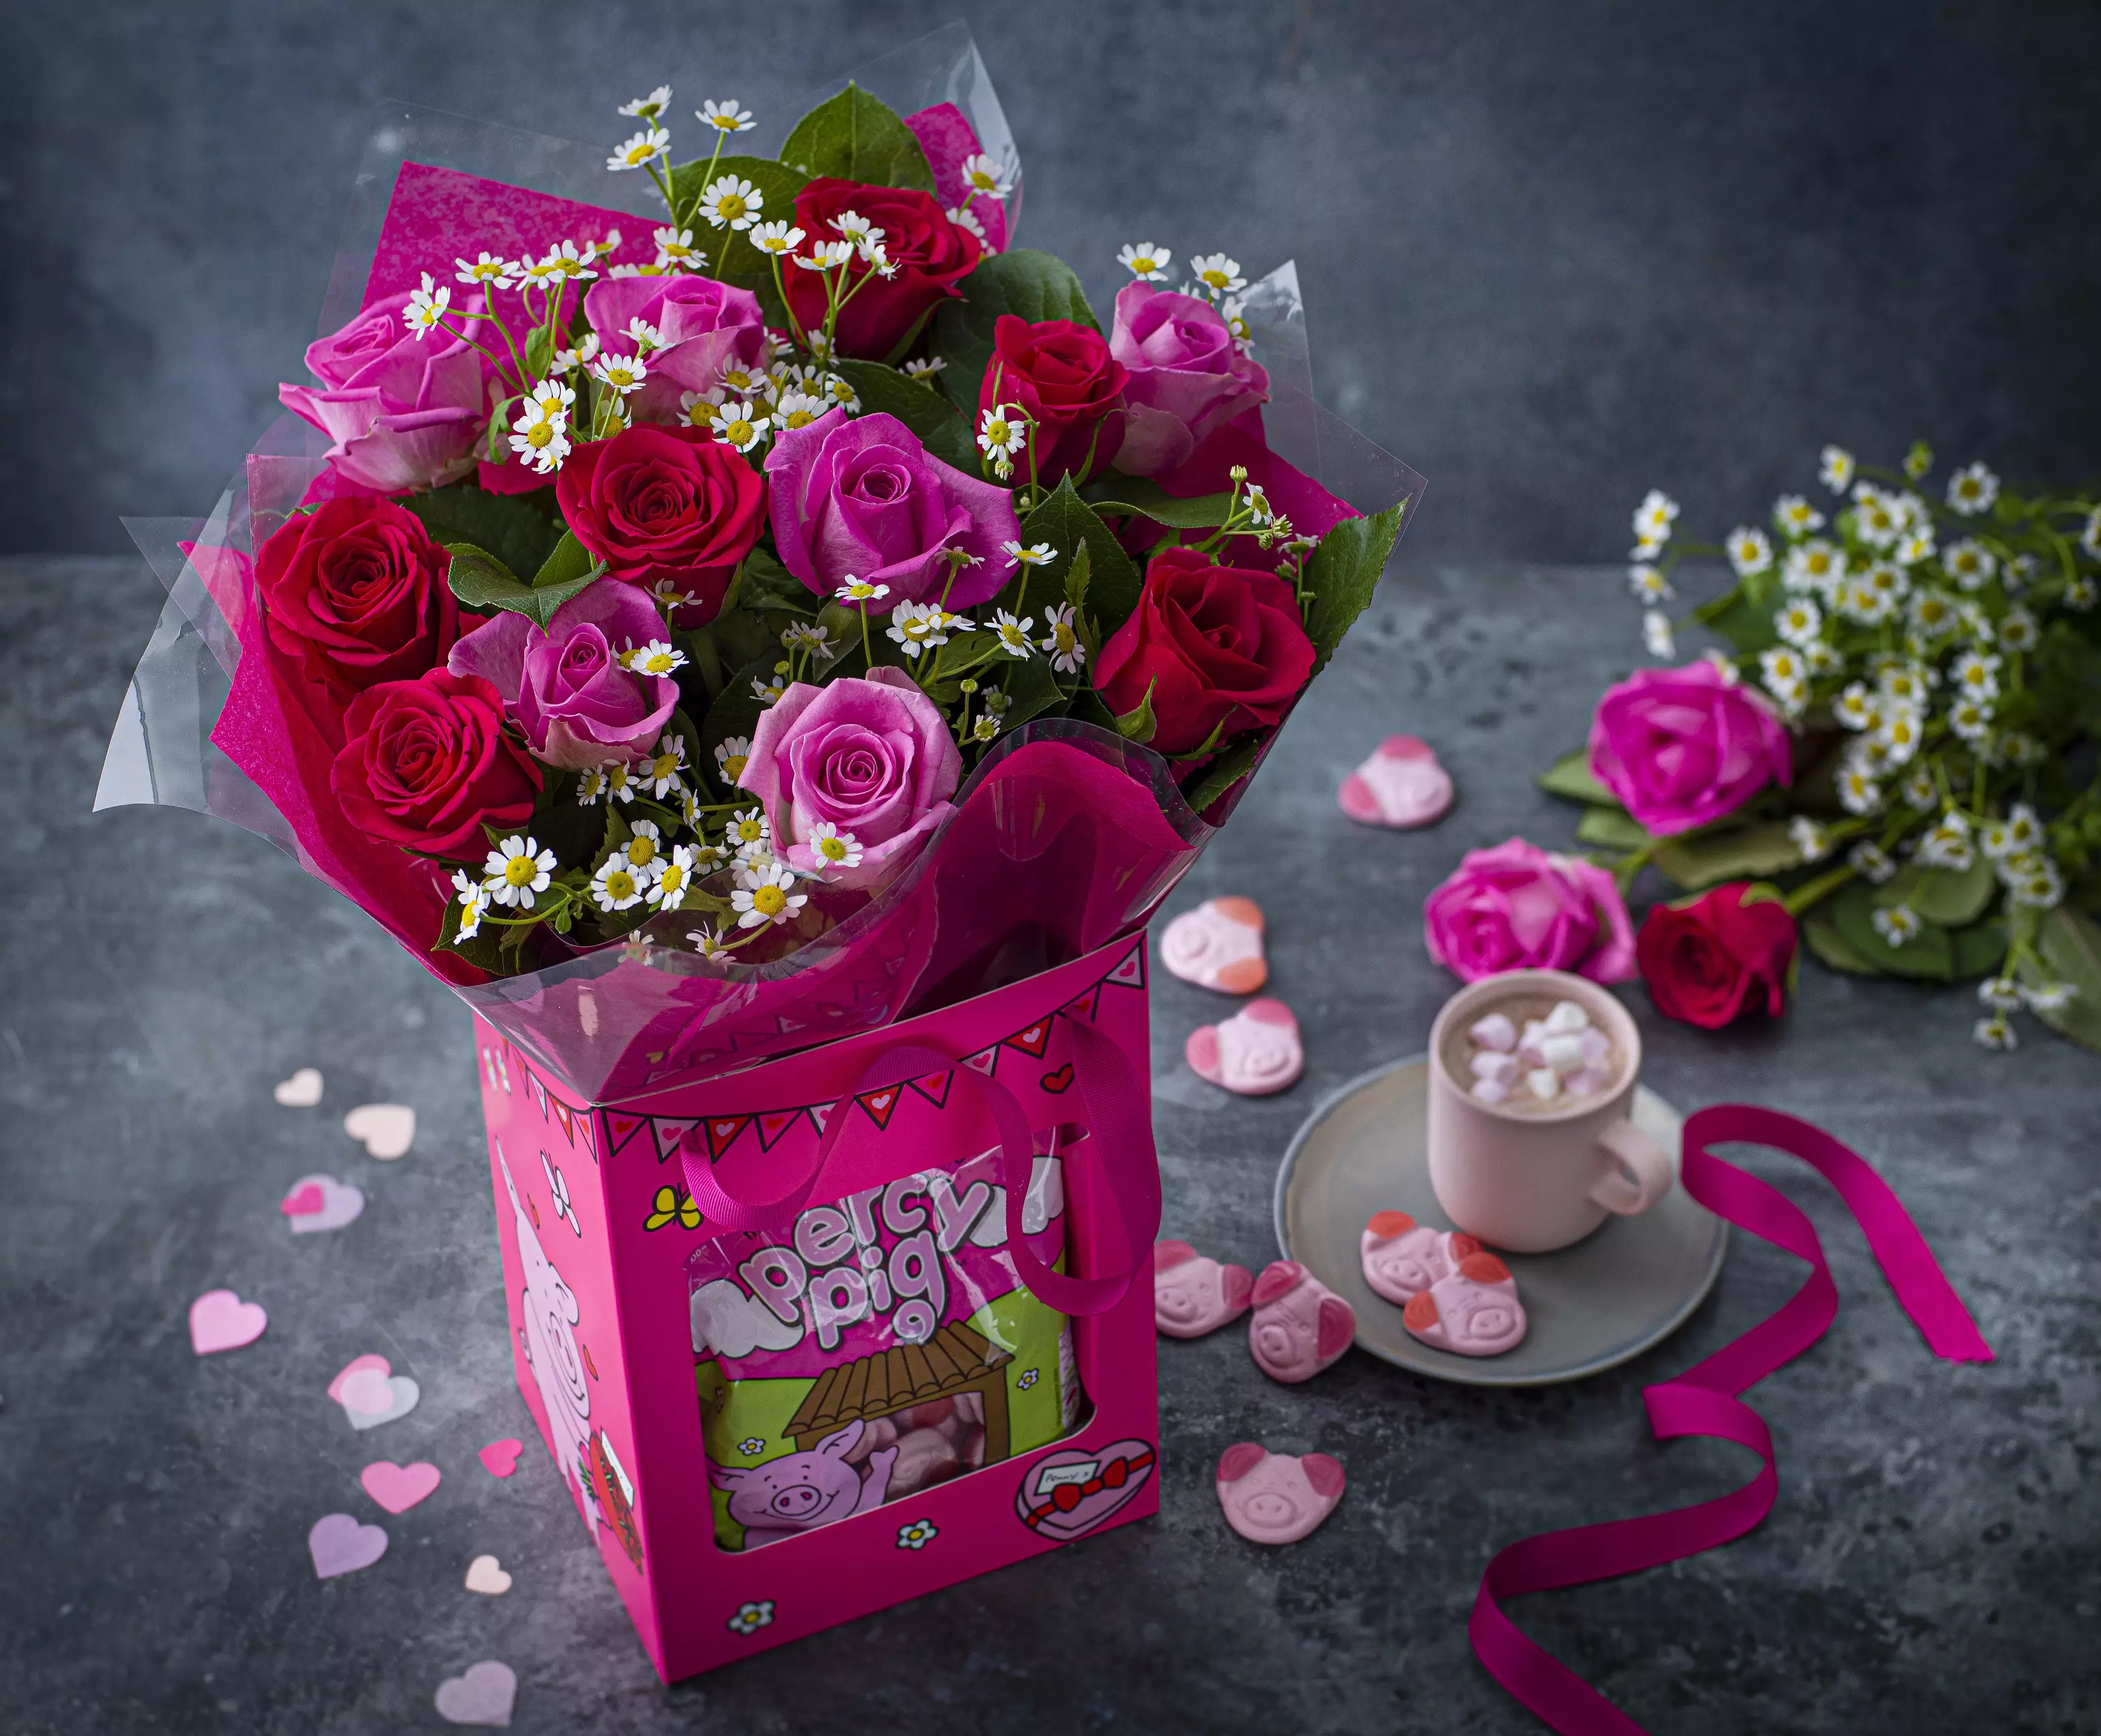 There's also a Valentine's Percy & Penny Flowers Gift Bag (